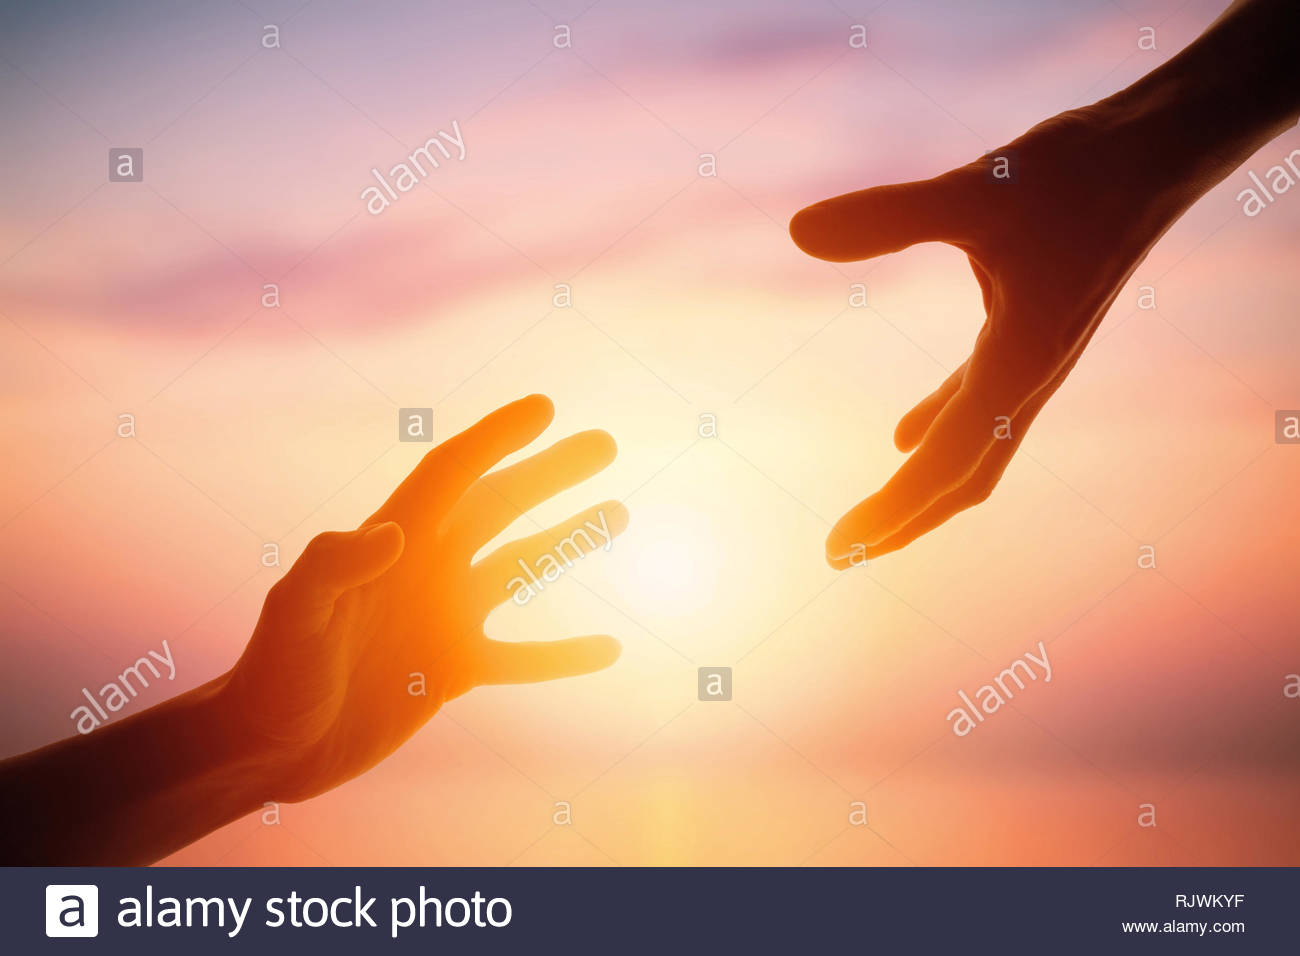 Giving A Helping Hand On The Background Of Dawn Stock Photo